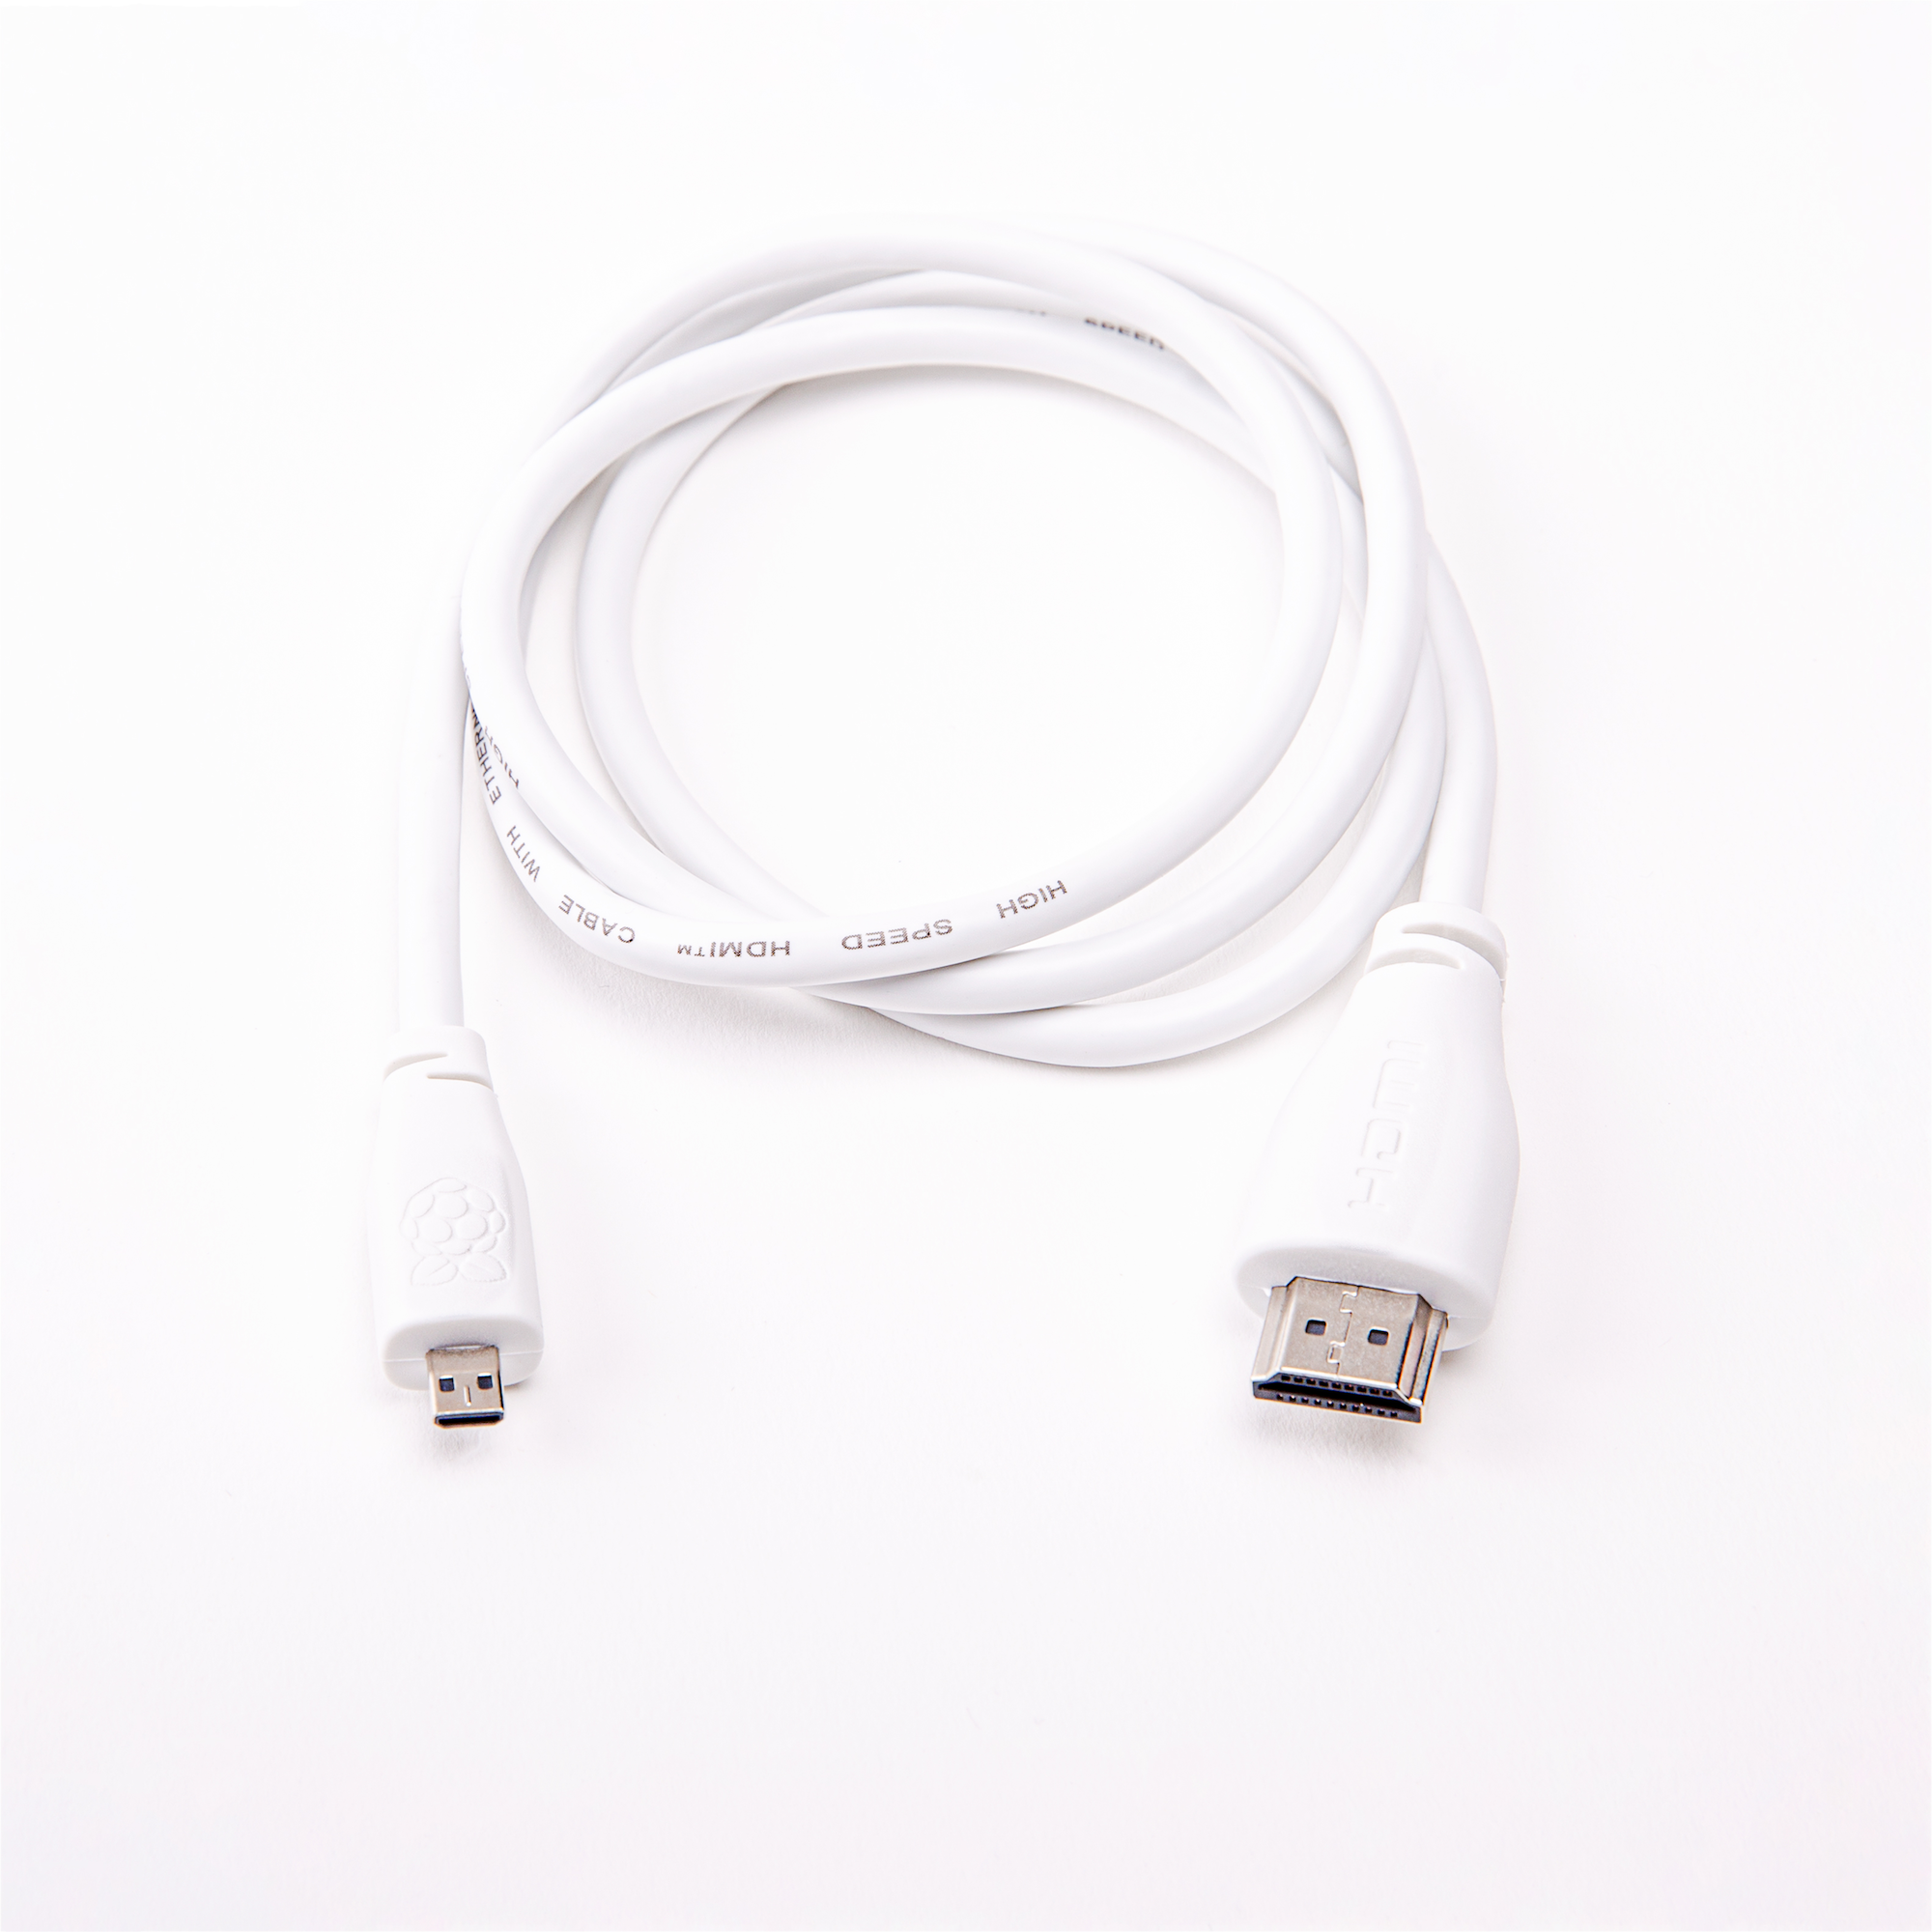 Raspberry Pi micro-HDMI to standard Cable, to 2 meter, White or